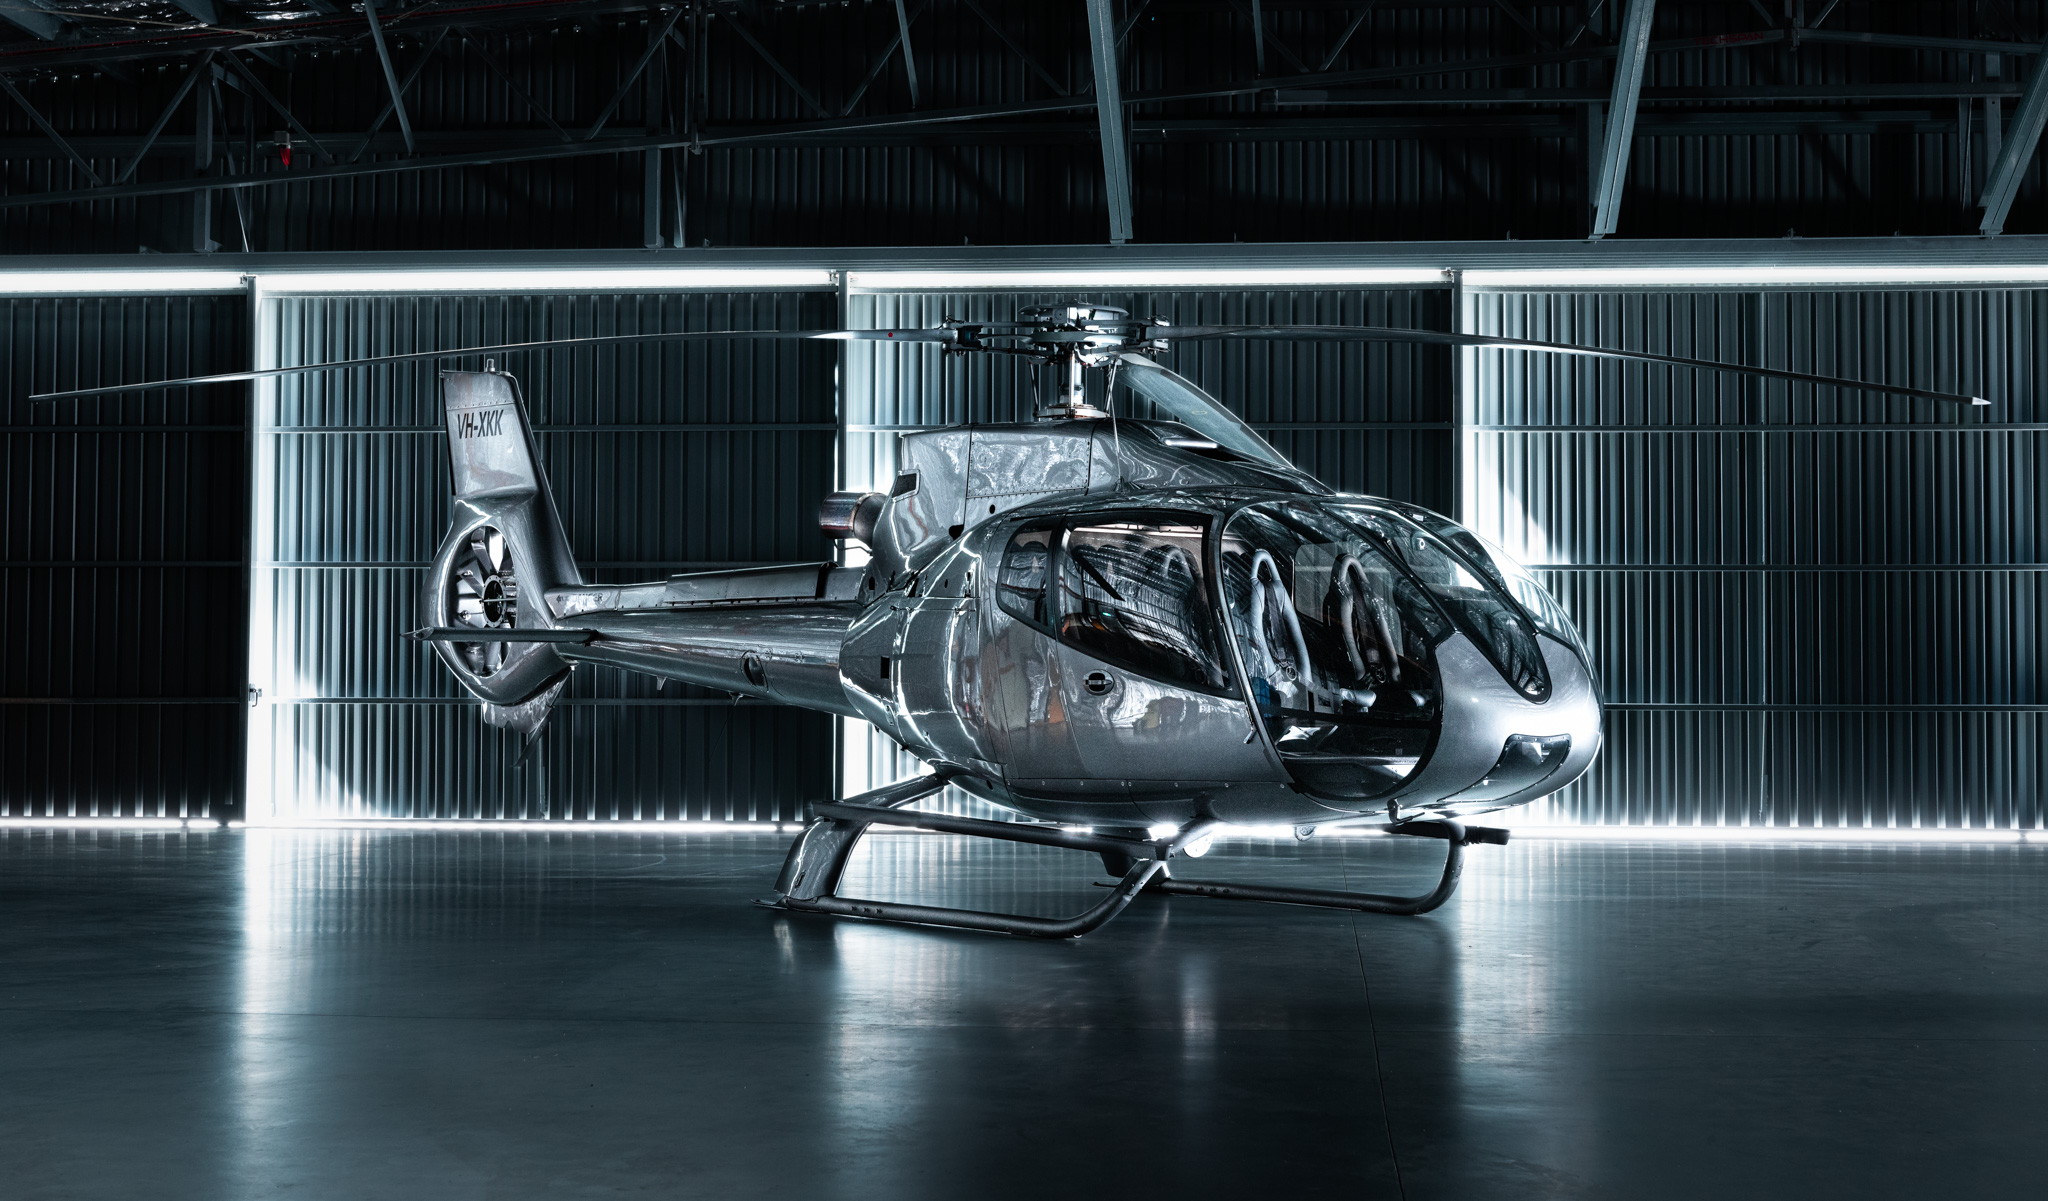 EC130 with Cabin Lights | Helicopter Charters Gold Coast, Brisbane, Northern NSW